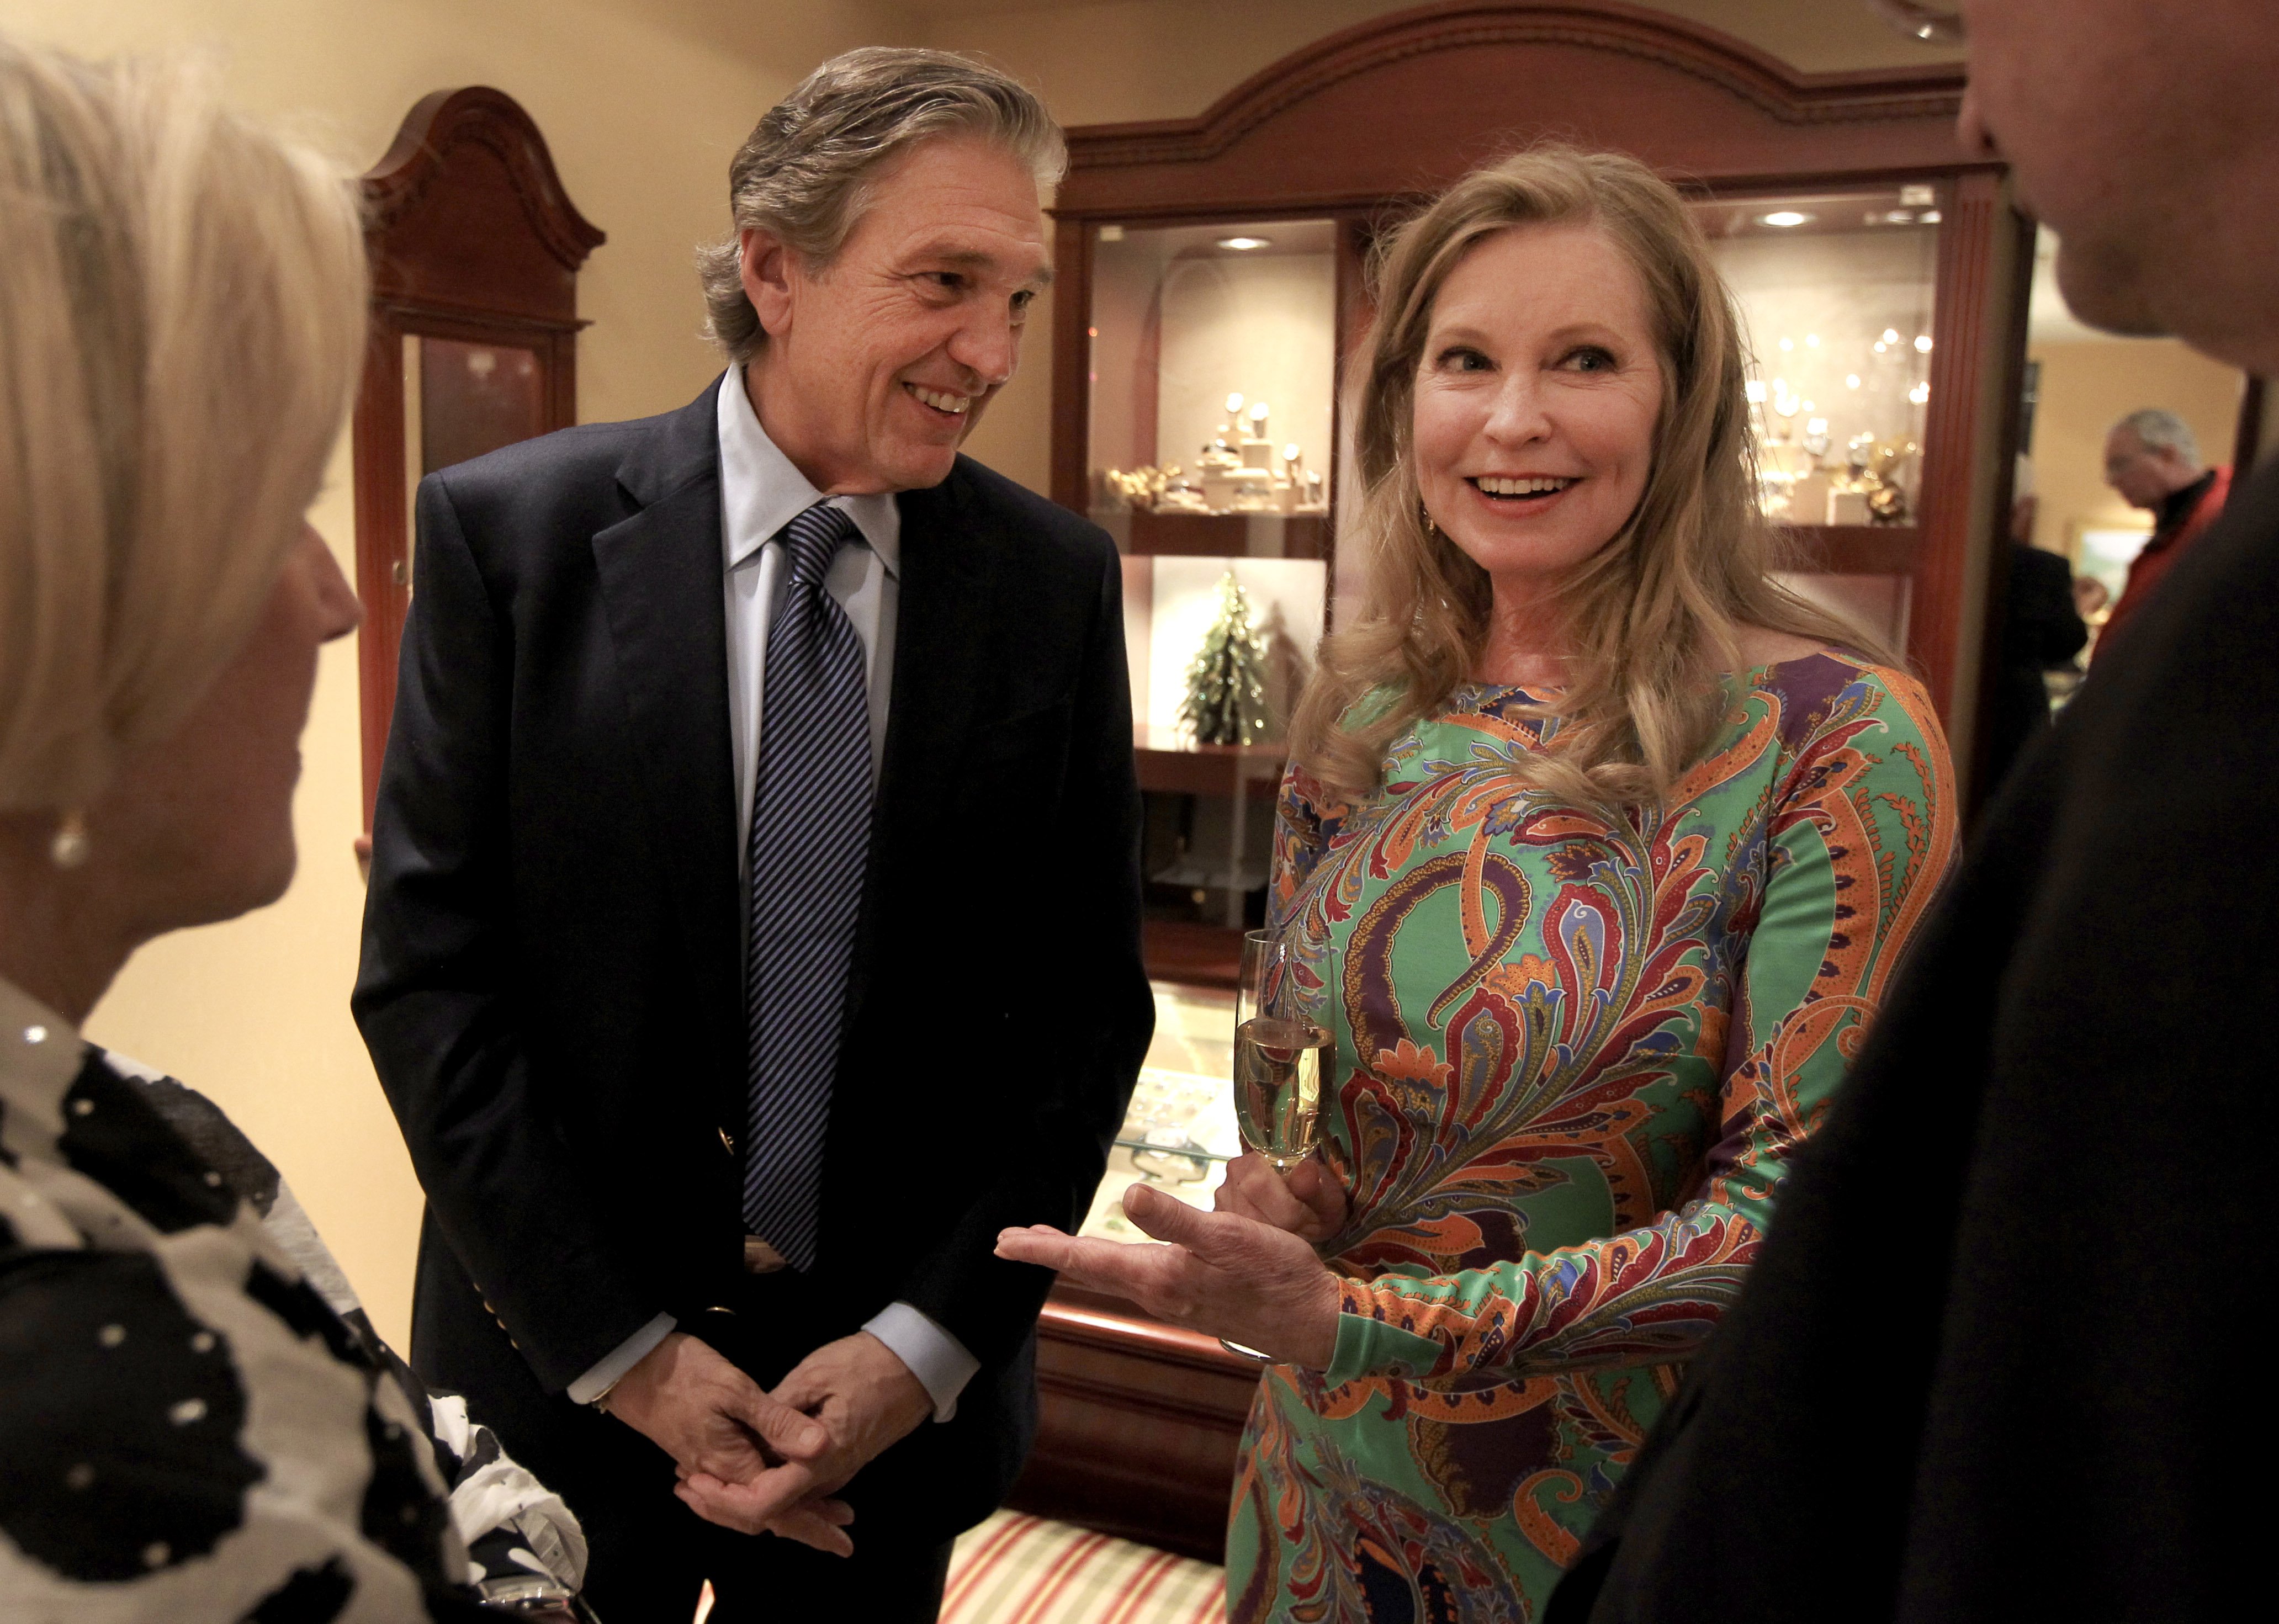 Albert DePrisco, left, and author, actor and director Lisa Niemi Swayze at a book signing event at DePrisco Jewelers in Wellesley on November 30, 2013. | Source: Getty Images